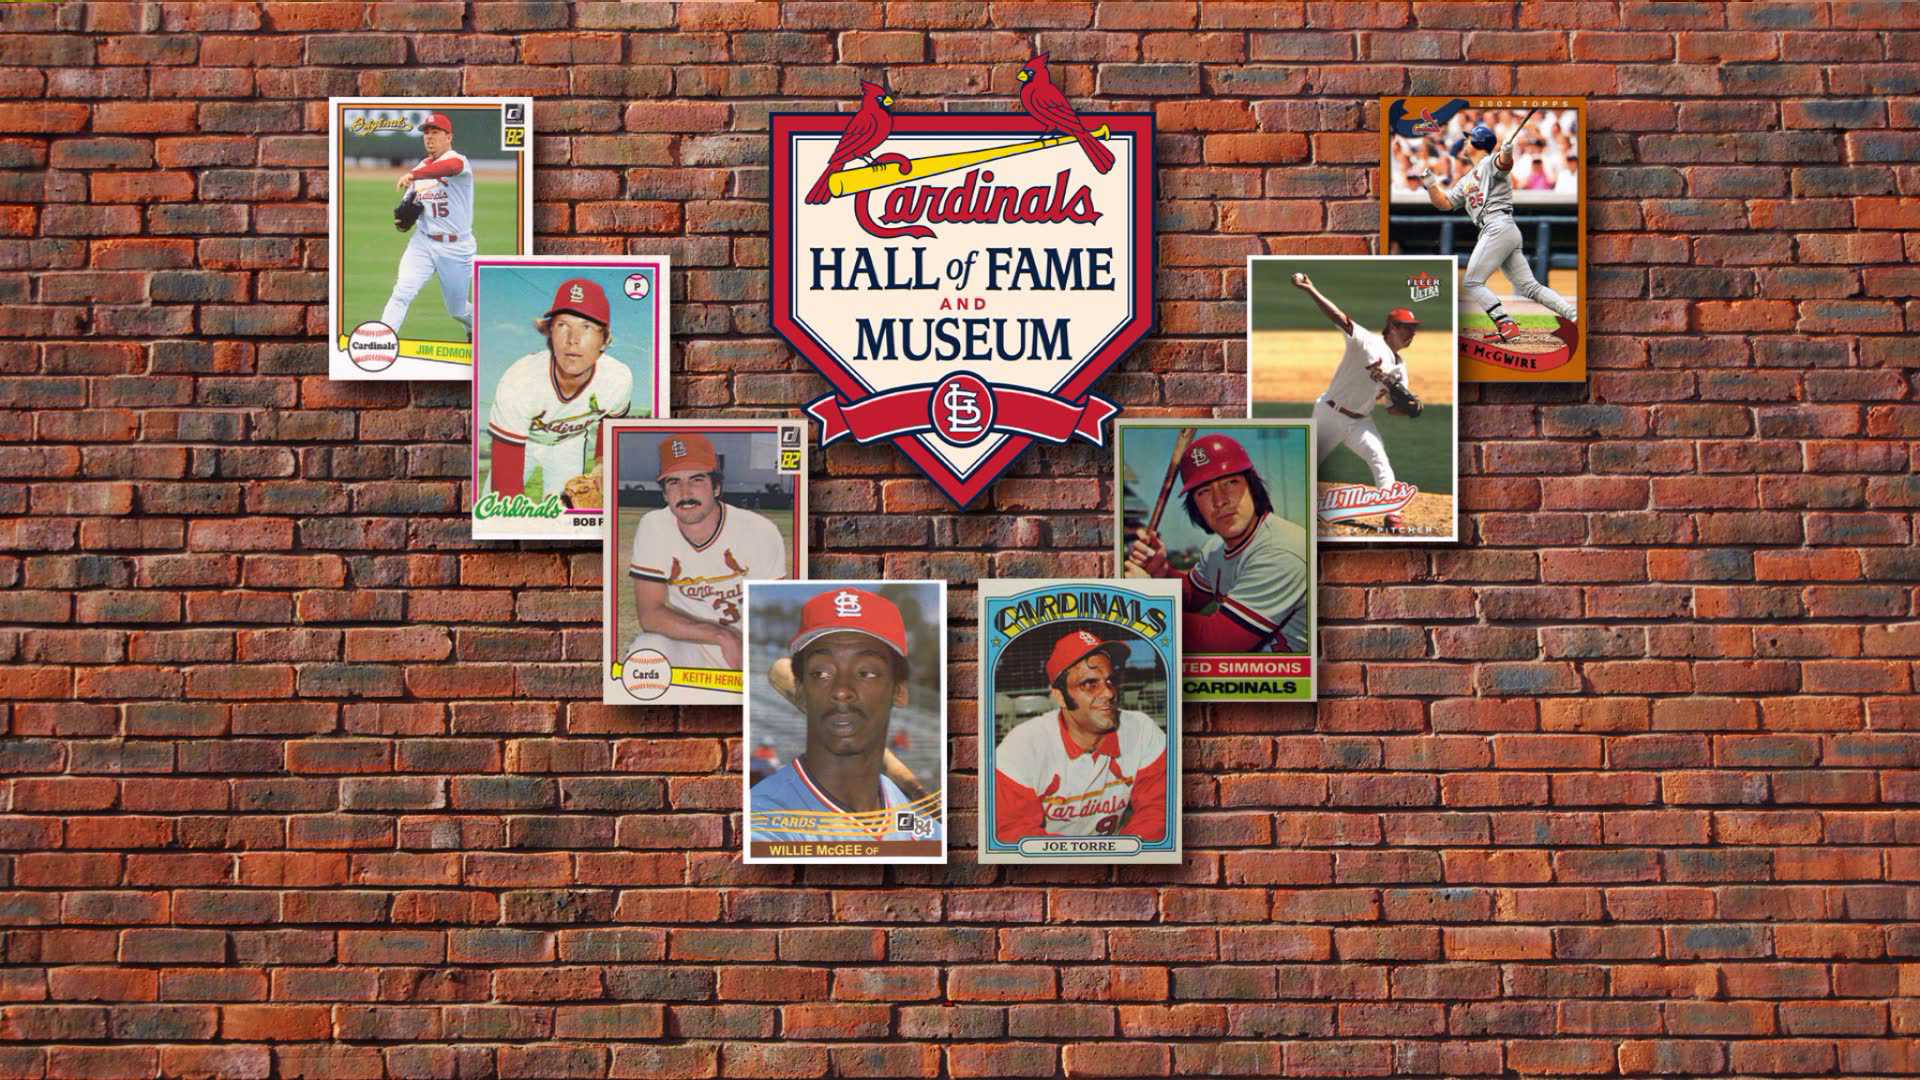 New Minor League Exhibit added to St. Louis Cardinals Museum – CARDINAL RED BASEBALL